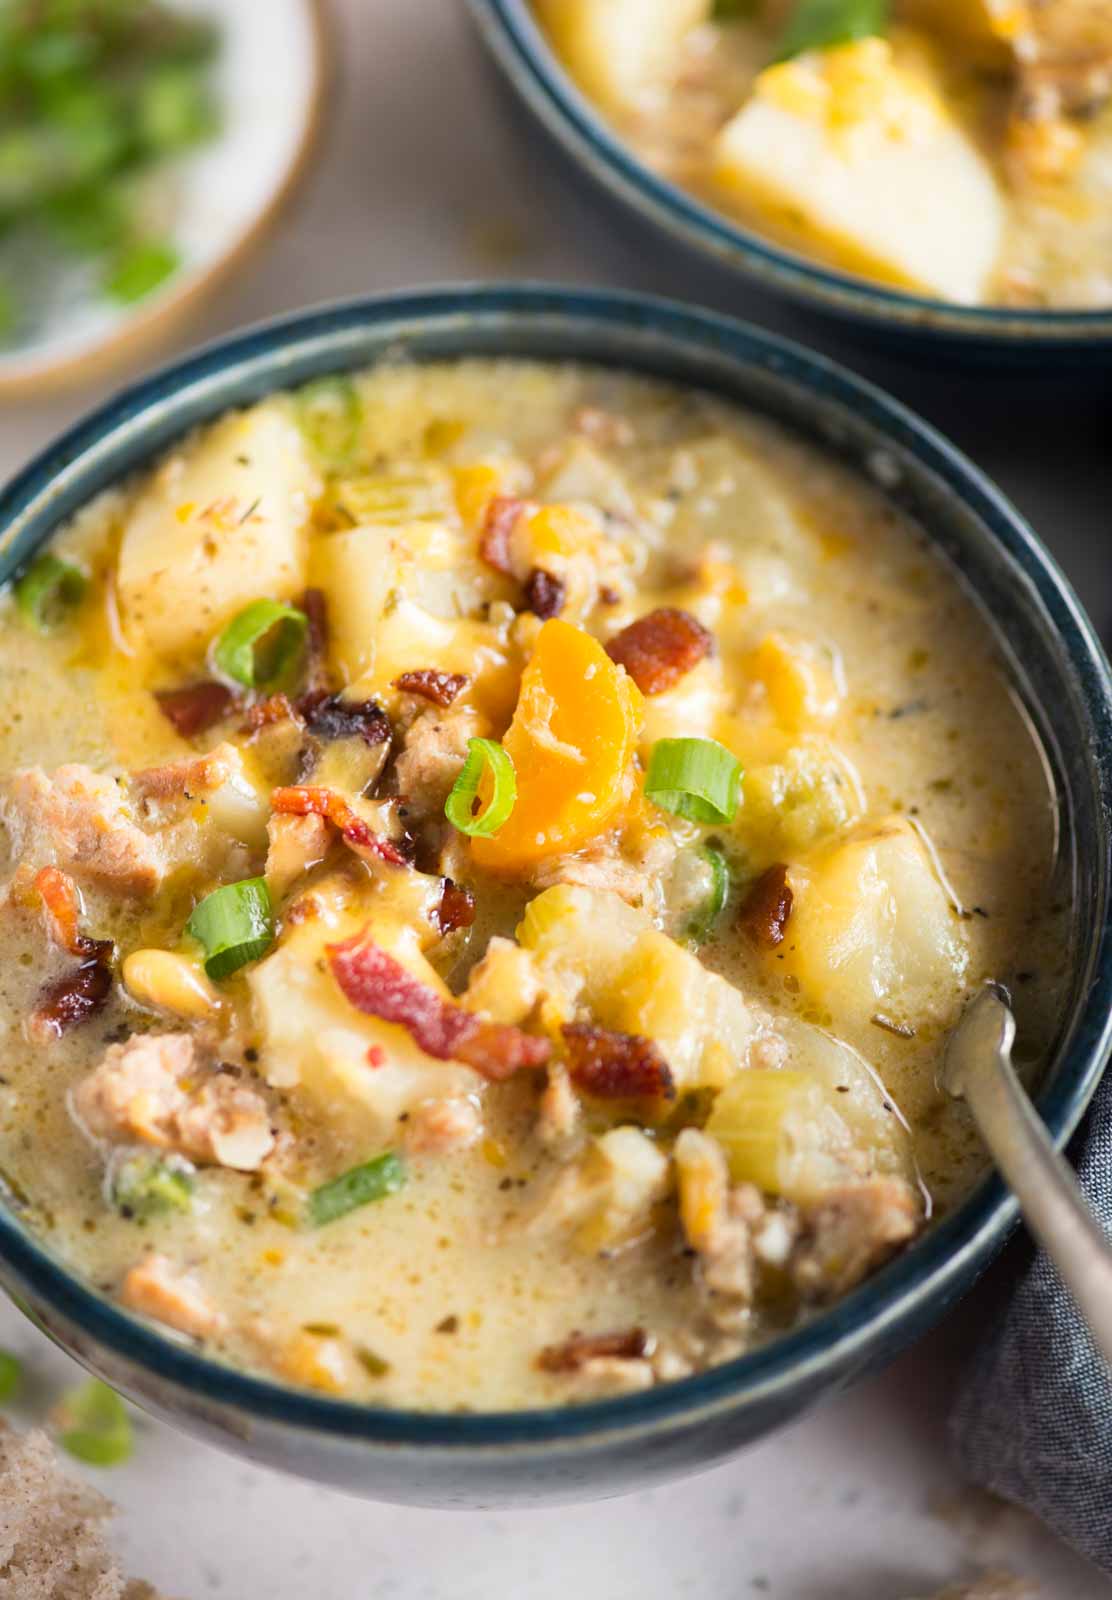 Instant Pot Potato Soup with sausage has tender soft potato, Italian sausage in a creamy yet light, and flavorful broth. Serve this gluten-free soup with a generous topping of crispy bacon and cheese. 